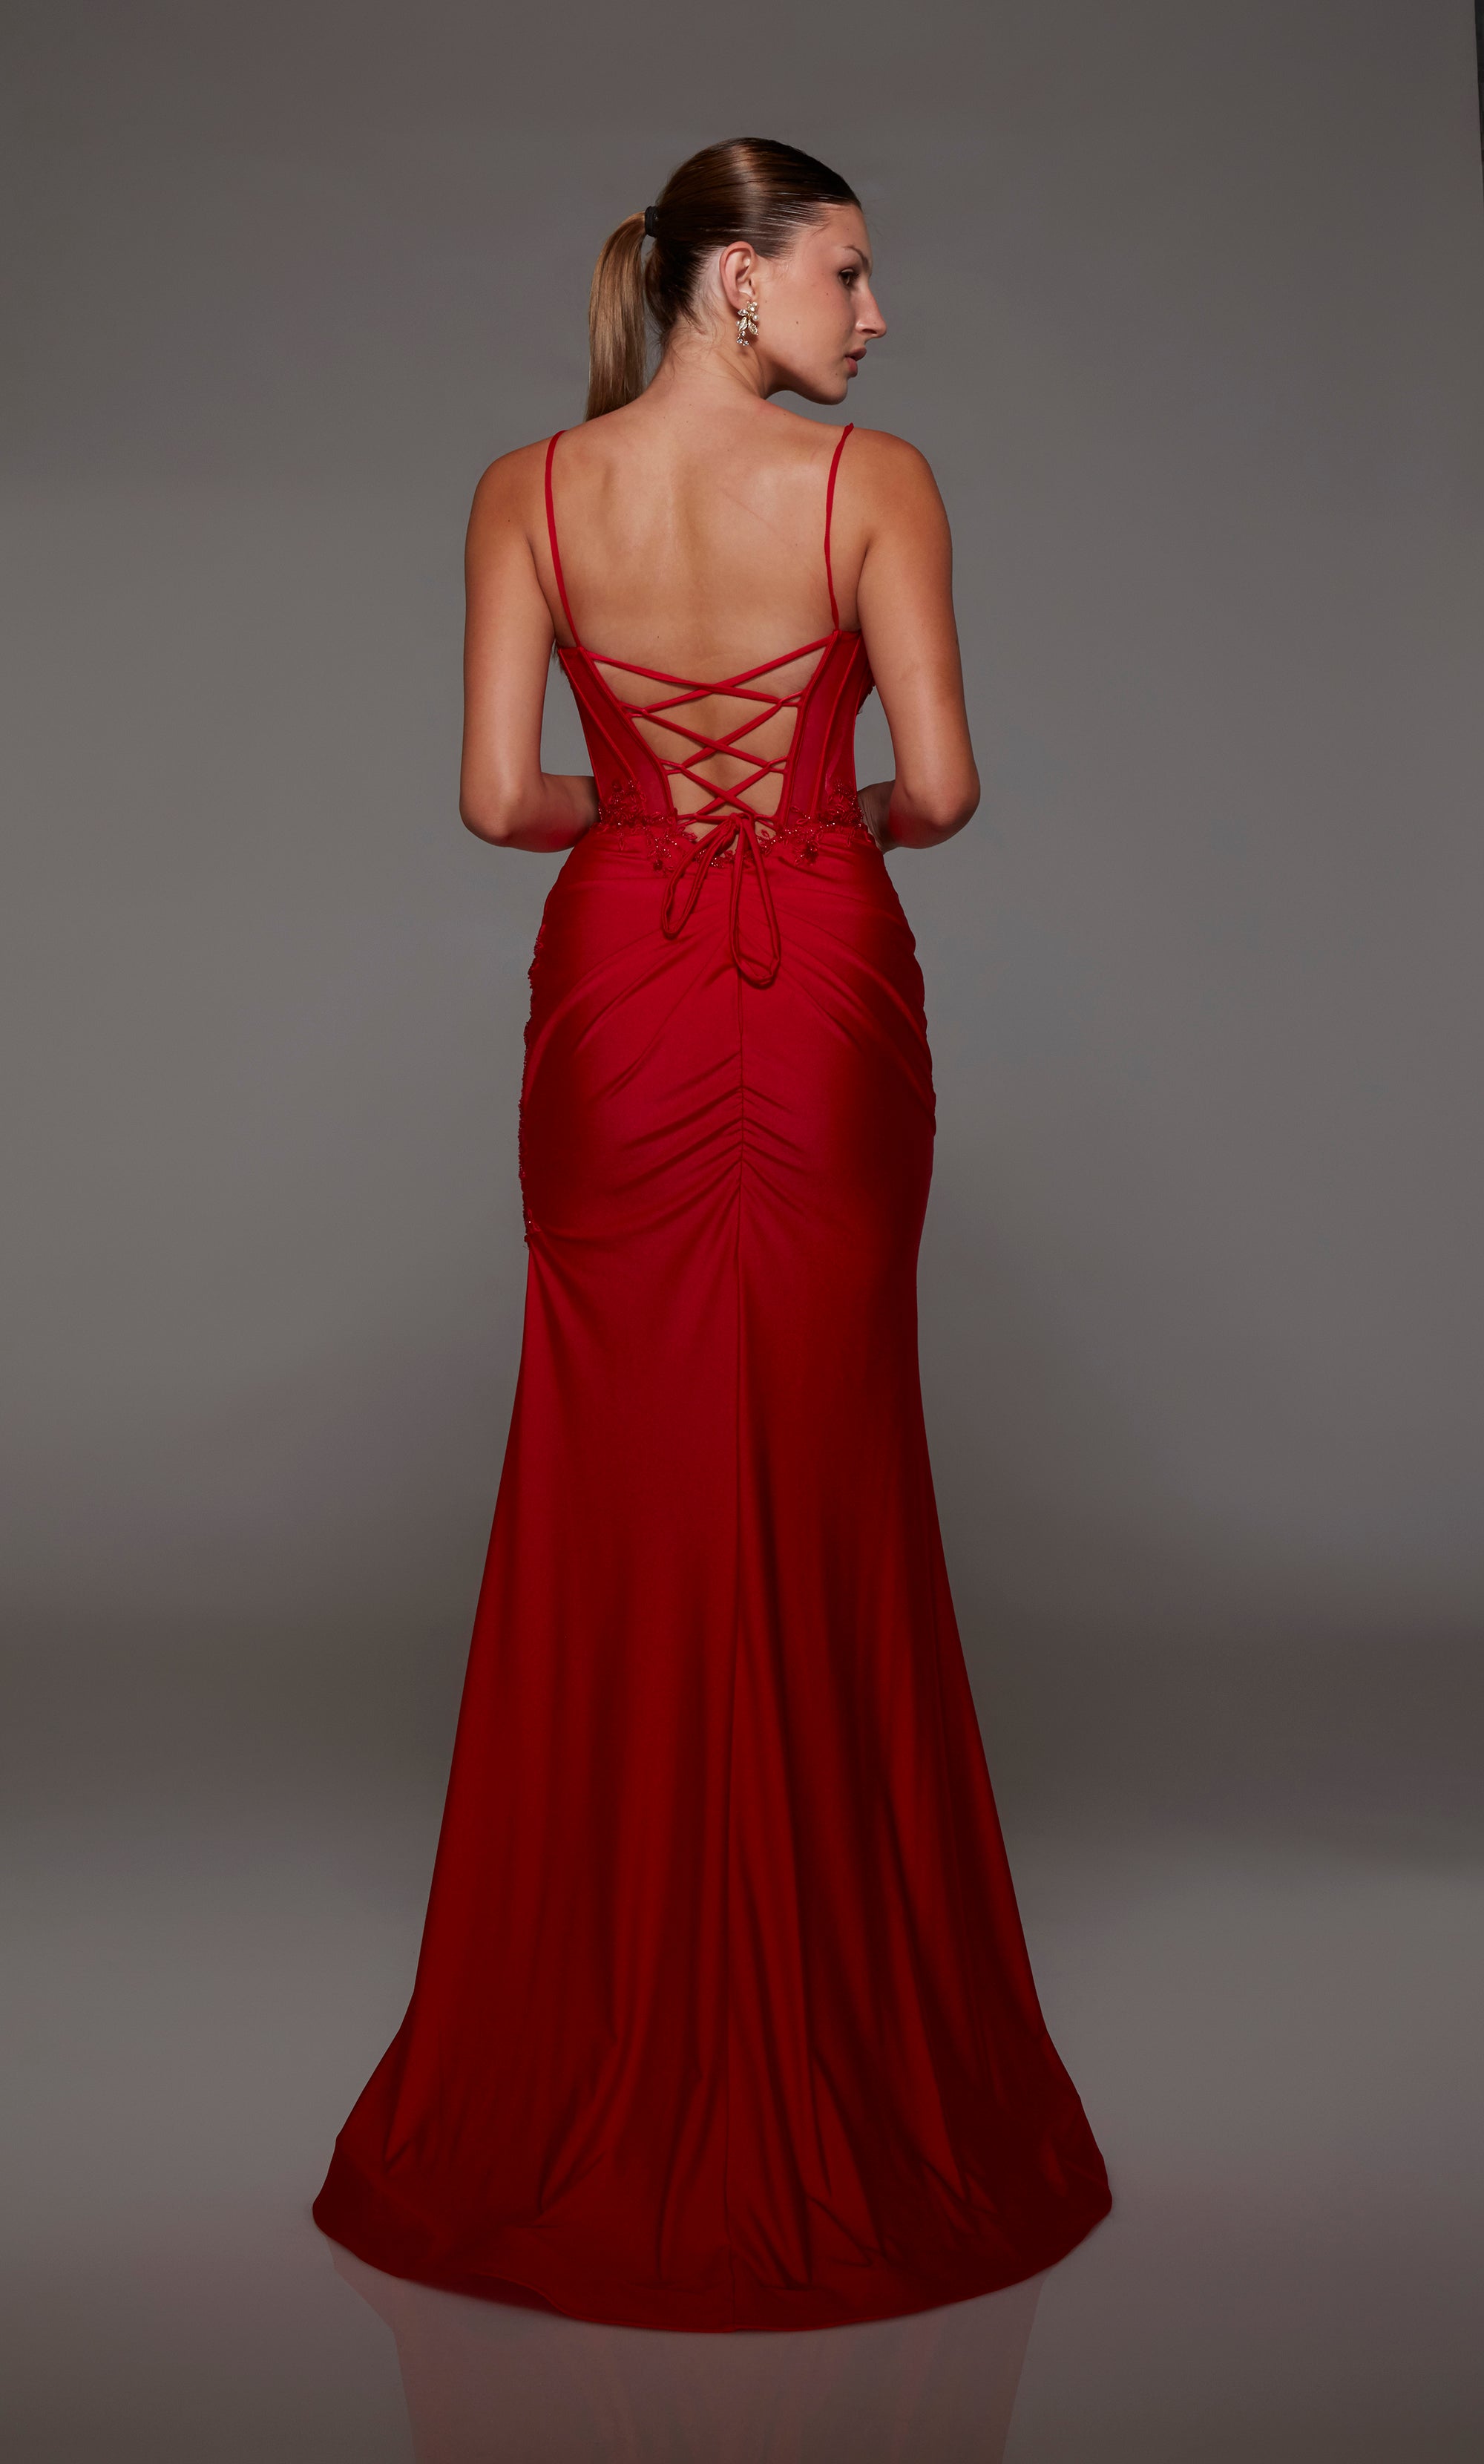 Sleek red corset prom dress: sweetheart neckline, sheer bodice, side slit, lace-up back, adorned with lace appliques for an touch of elegance.